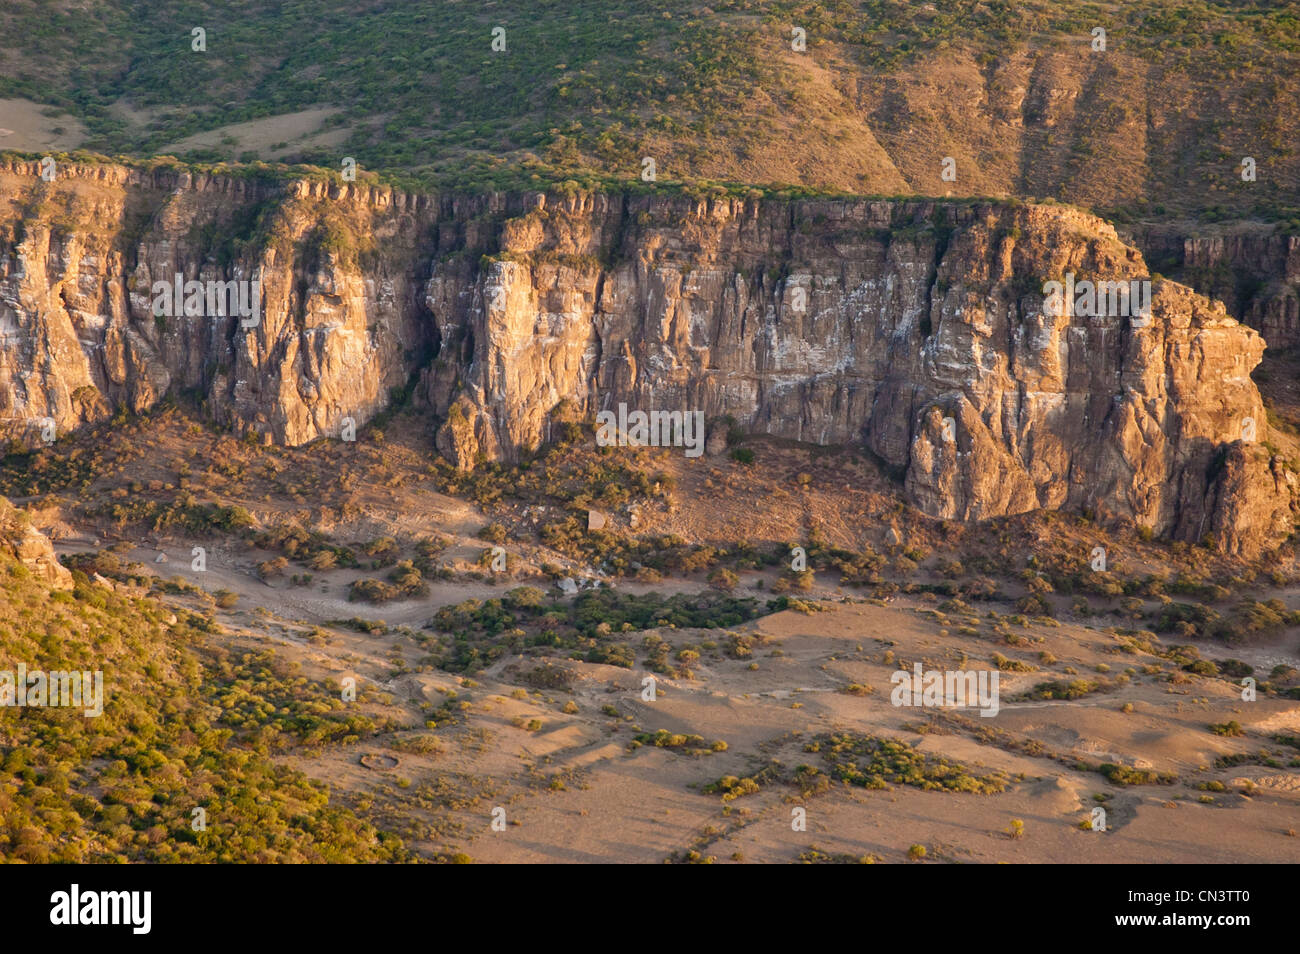 Nesting sites of Ruppell's vulture (Gyps ruppellii) at Ol Karien gorge, aerial view, aerial view, Tanzania Stock Photo